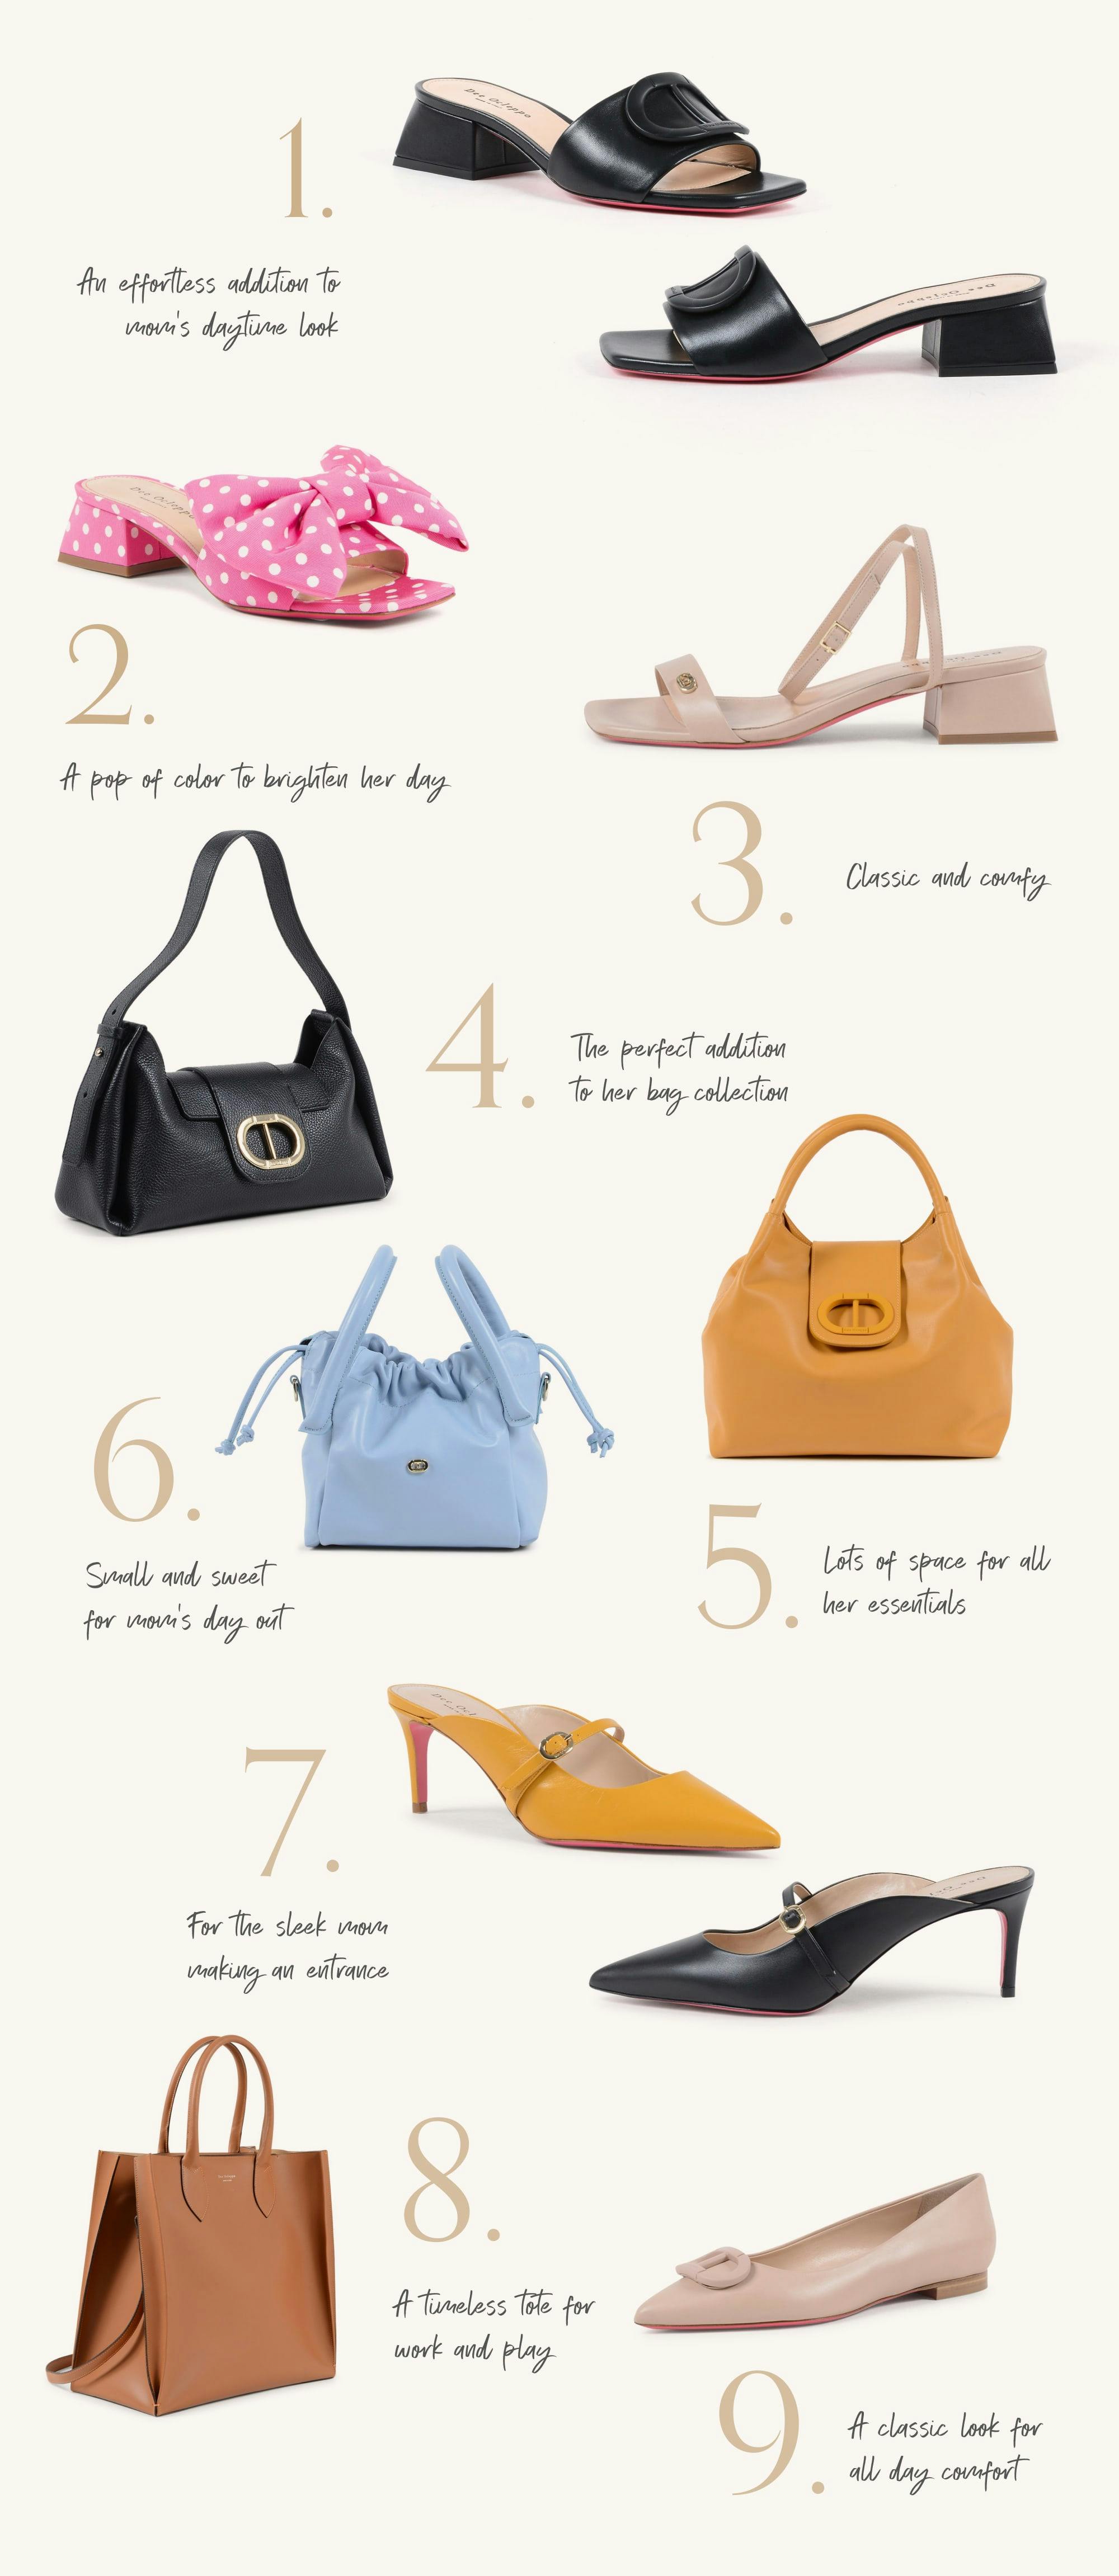 Mother's Day Gift Ideas: 7 Handbags She'll Love